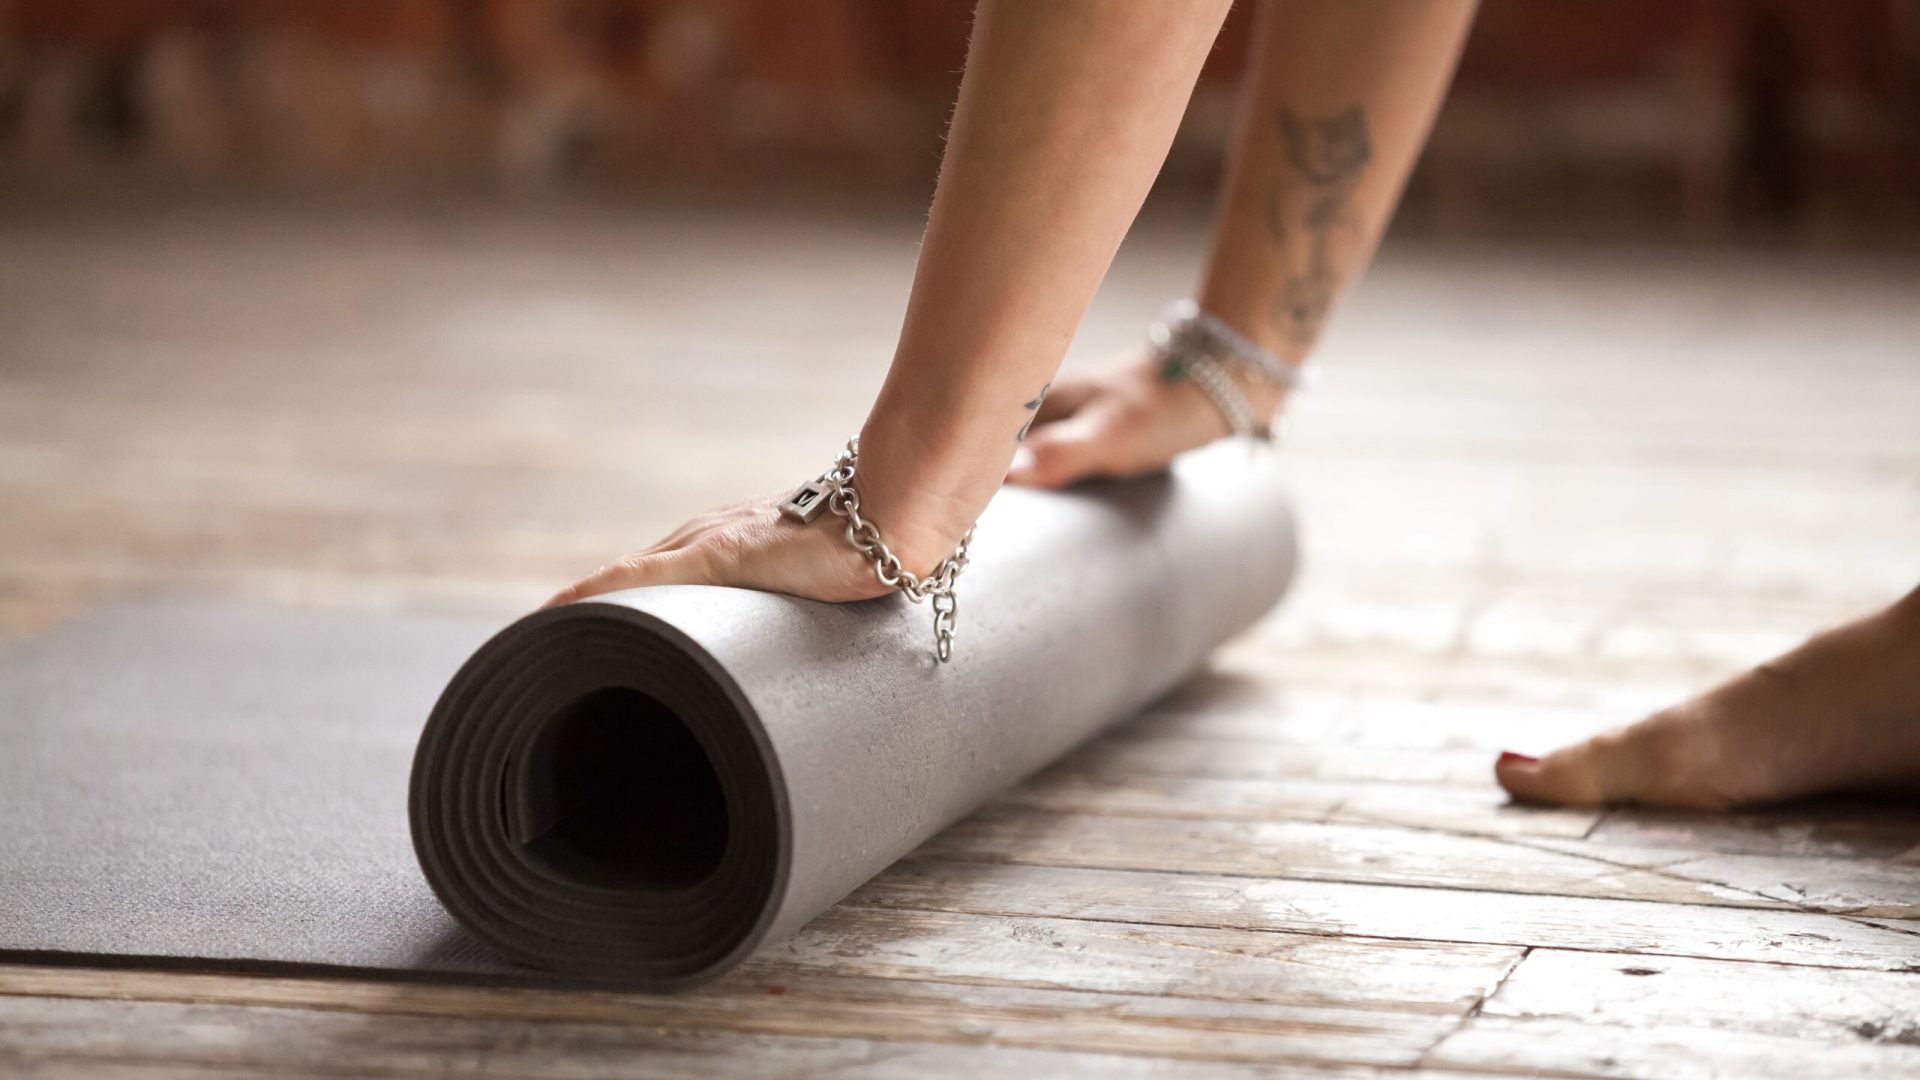 hands-rolling-fitness-mat-concept-healthy-lifestyle